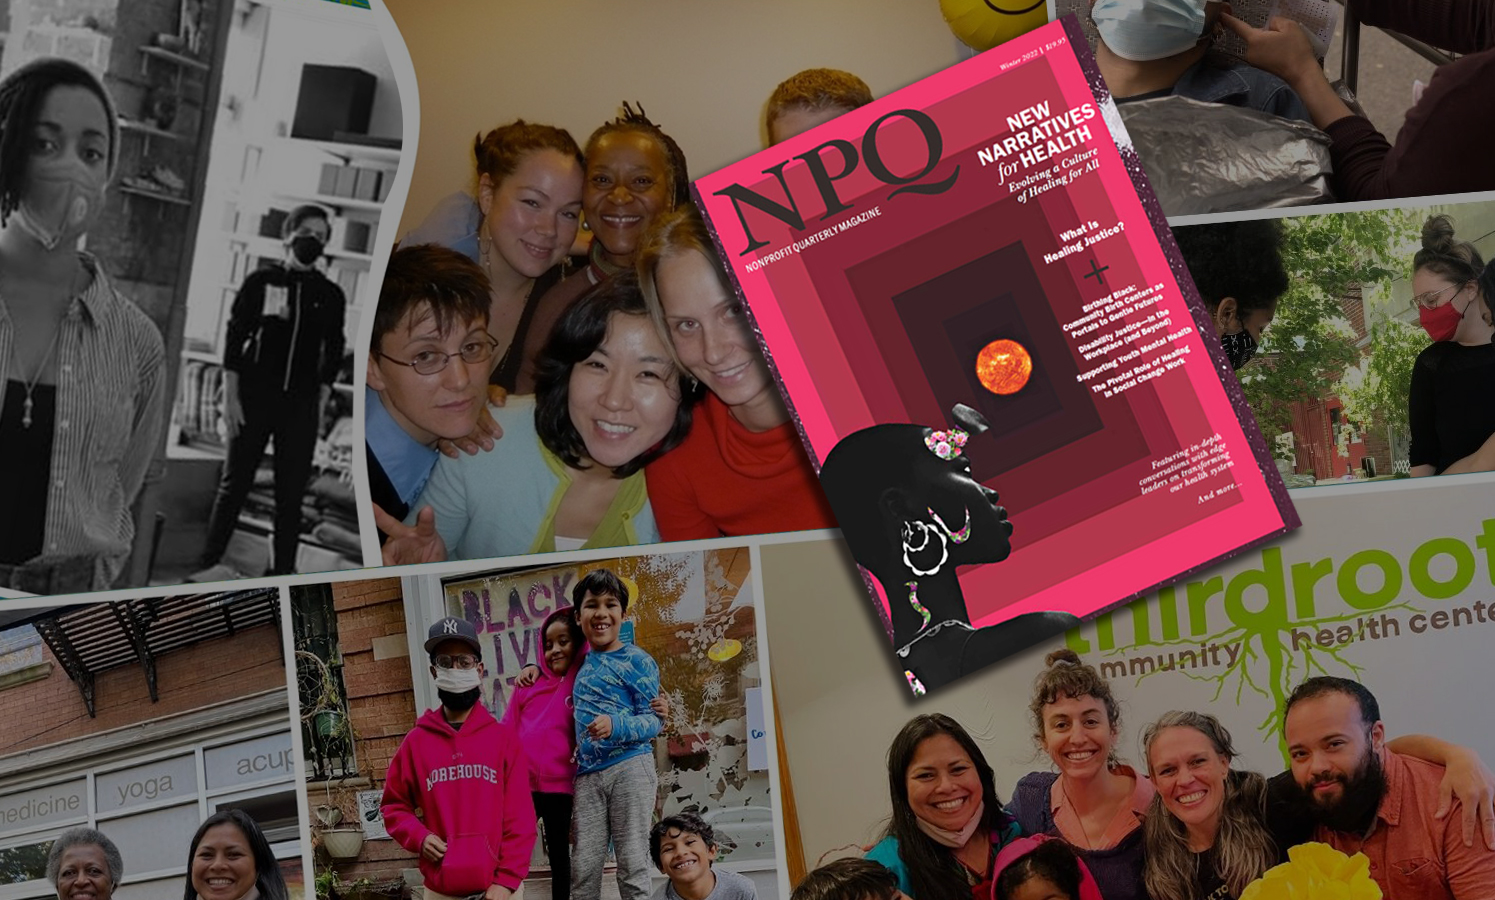 Collage of Thirdroot images published in NPQ Magazine